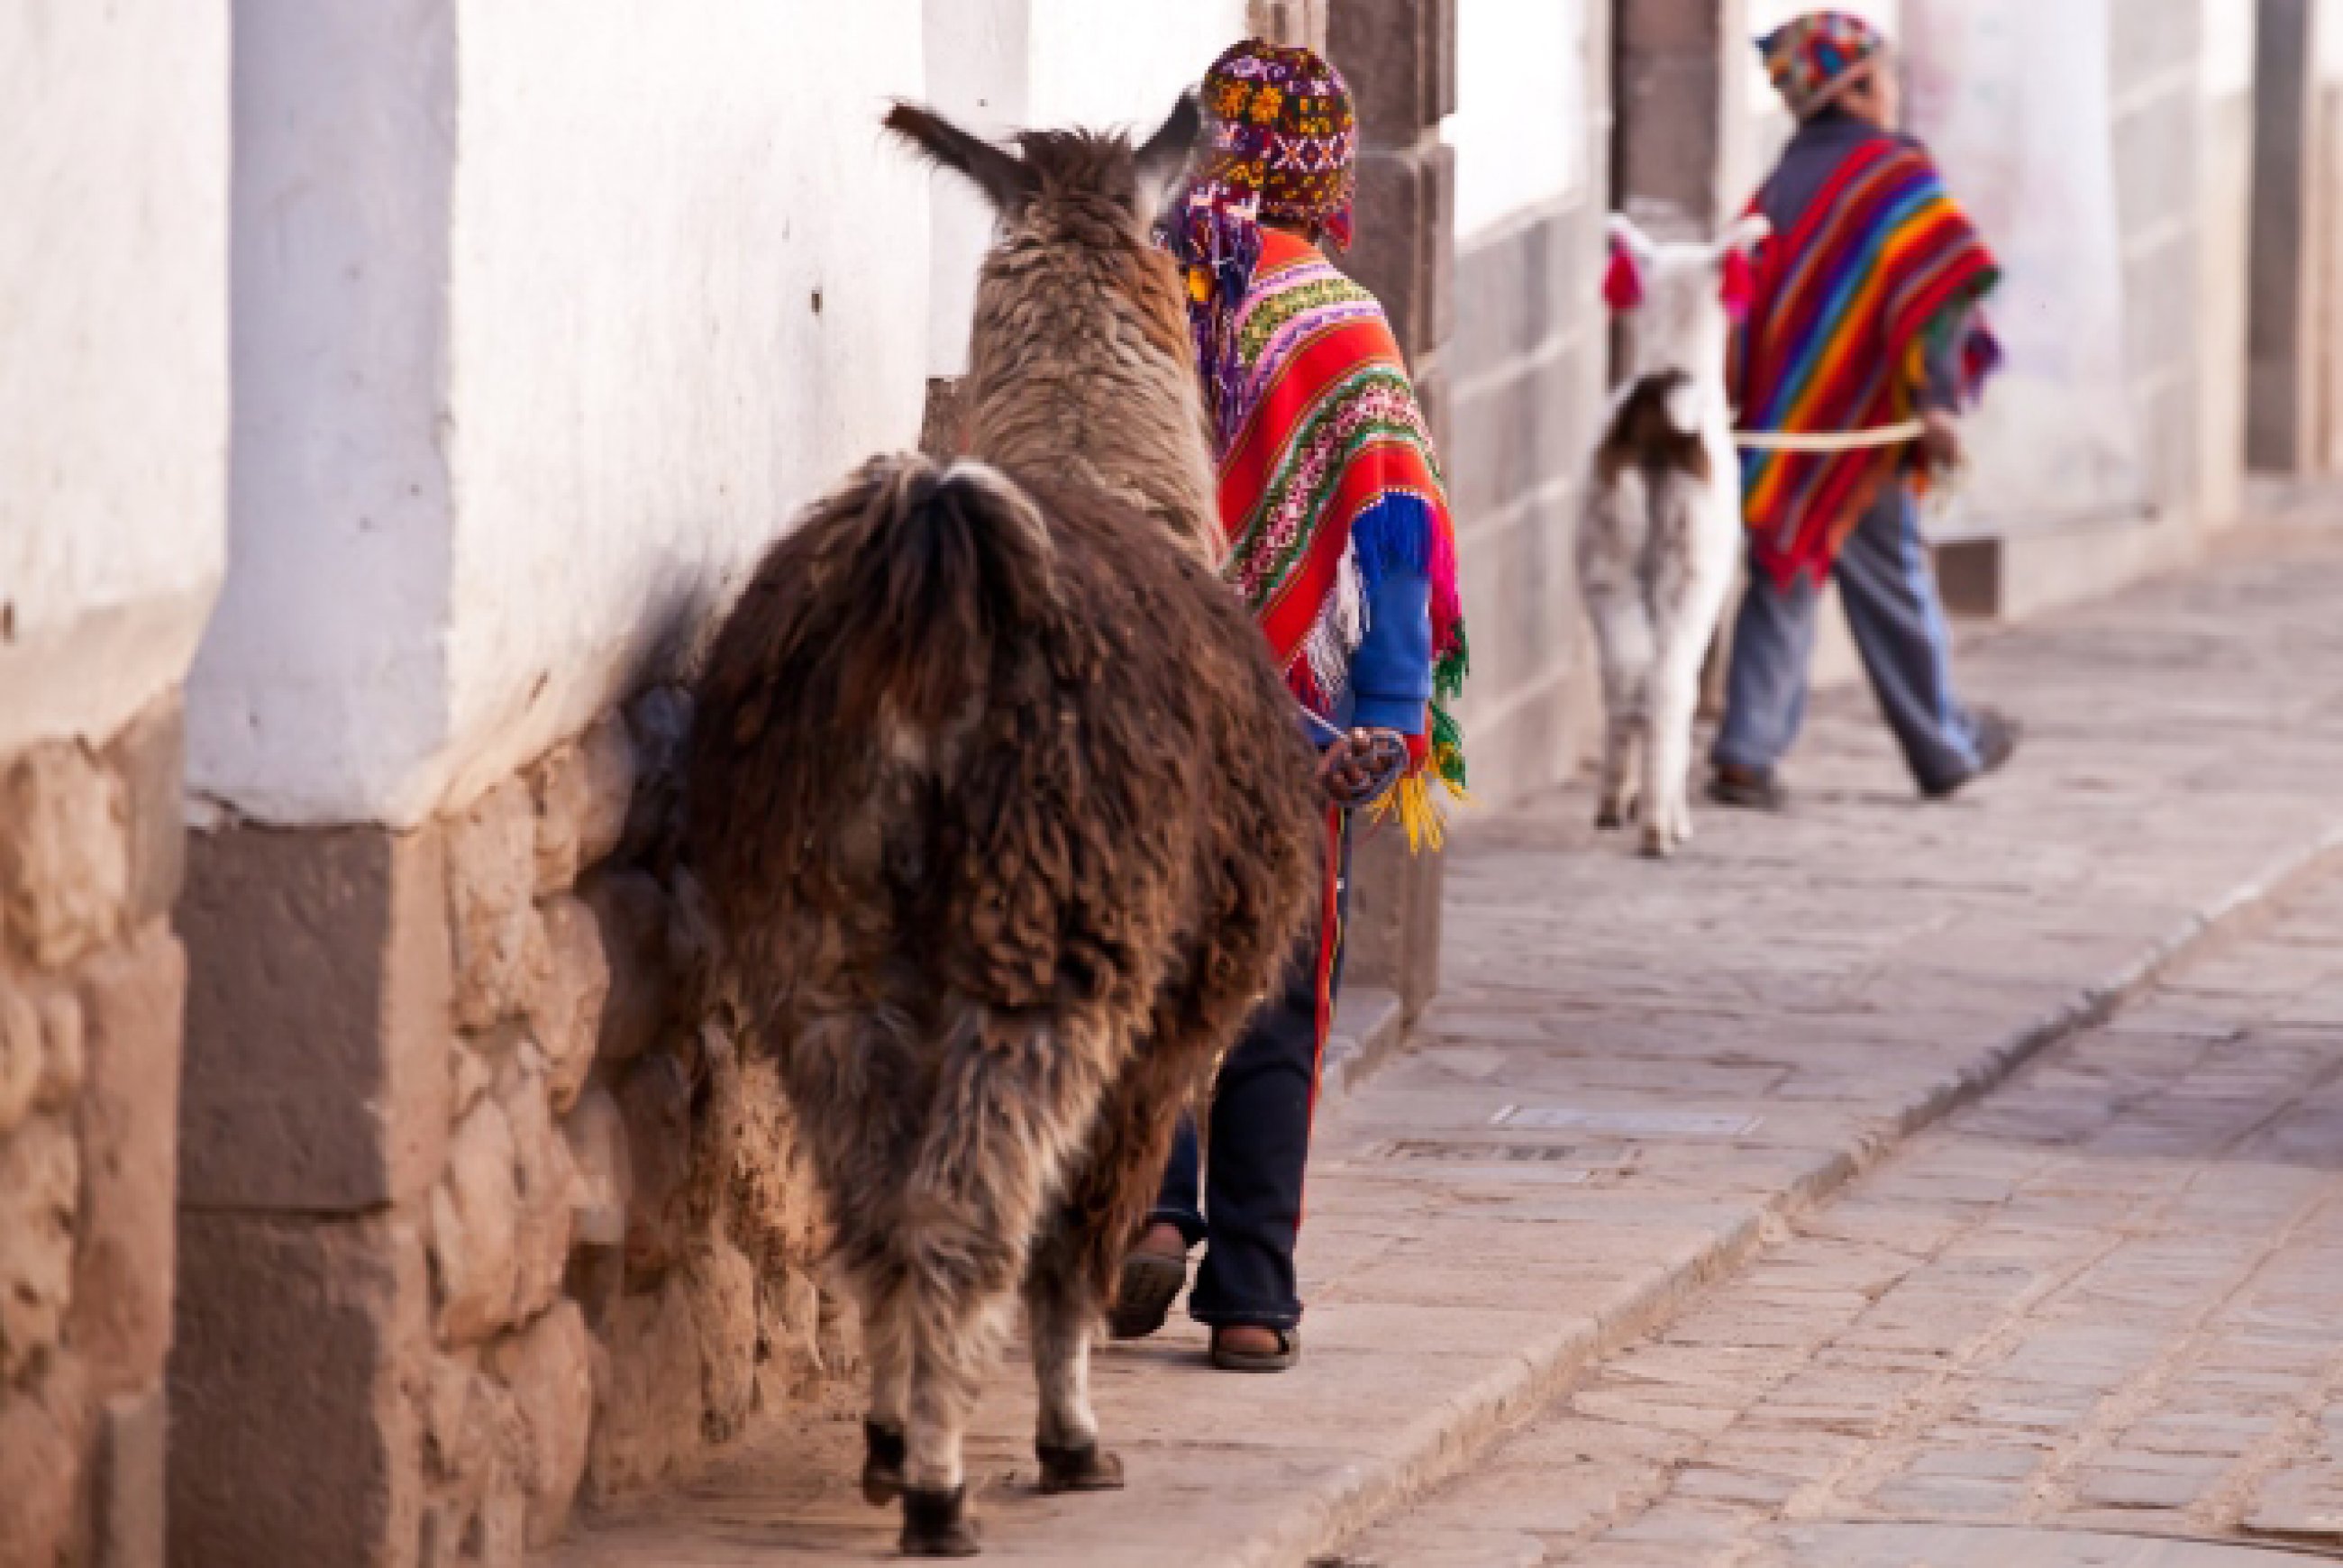 https://bubo.sk/uploads/galleries/7430/child-in-traditional-clothes-with-lama-walking-cuzco-street-peru.jpg